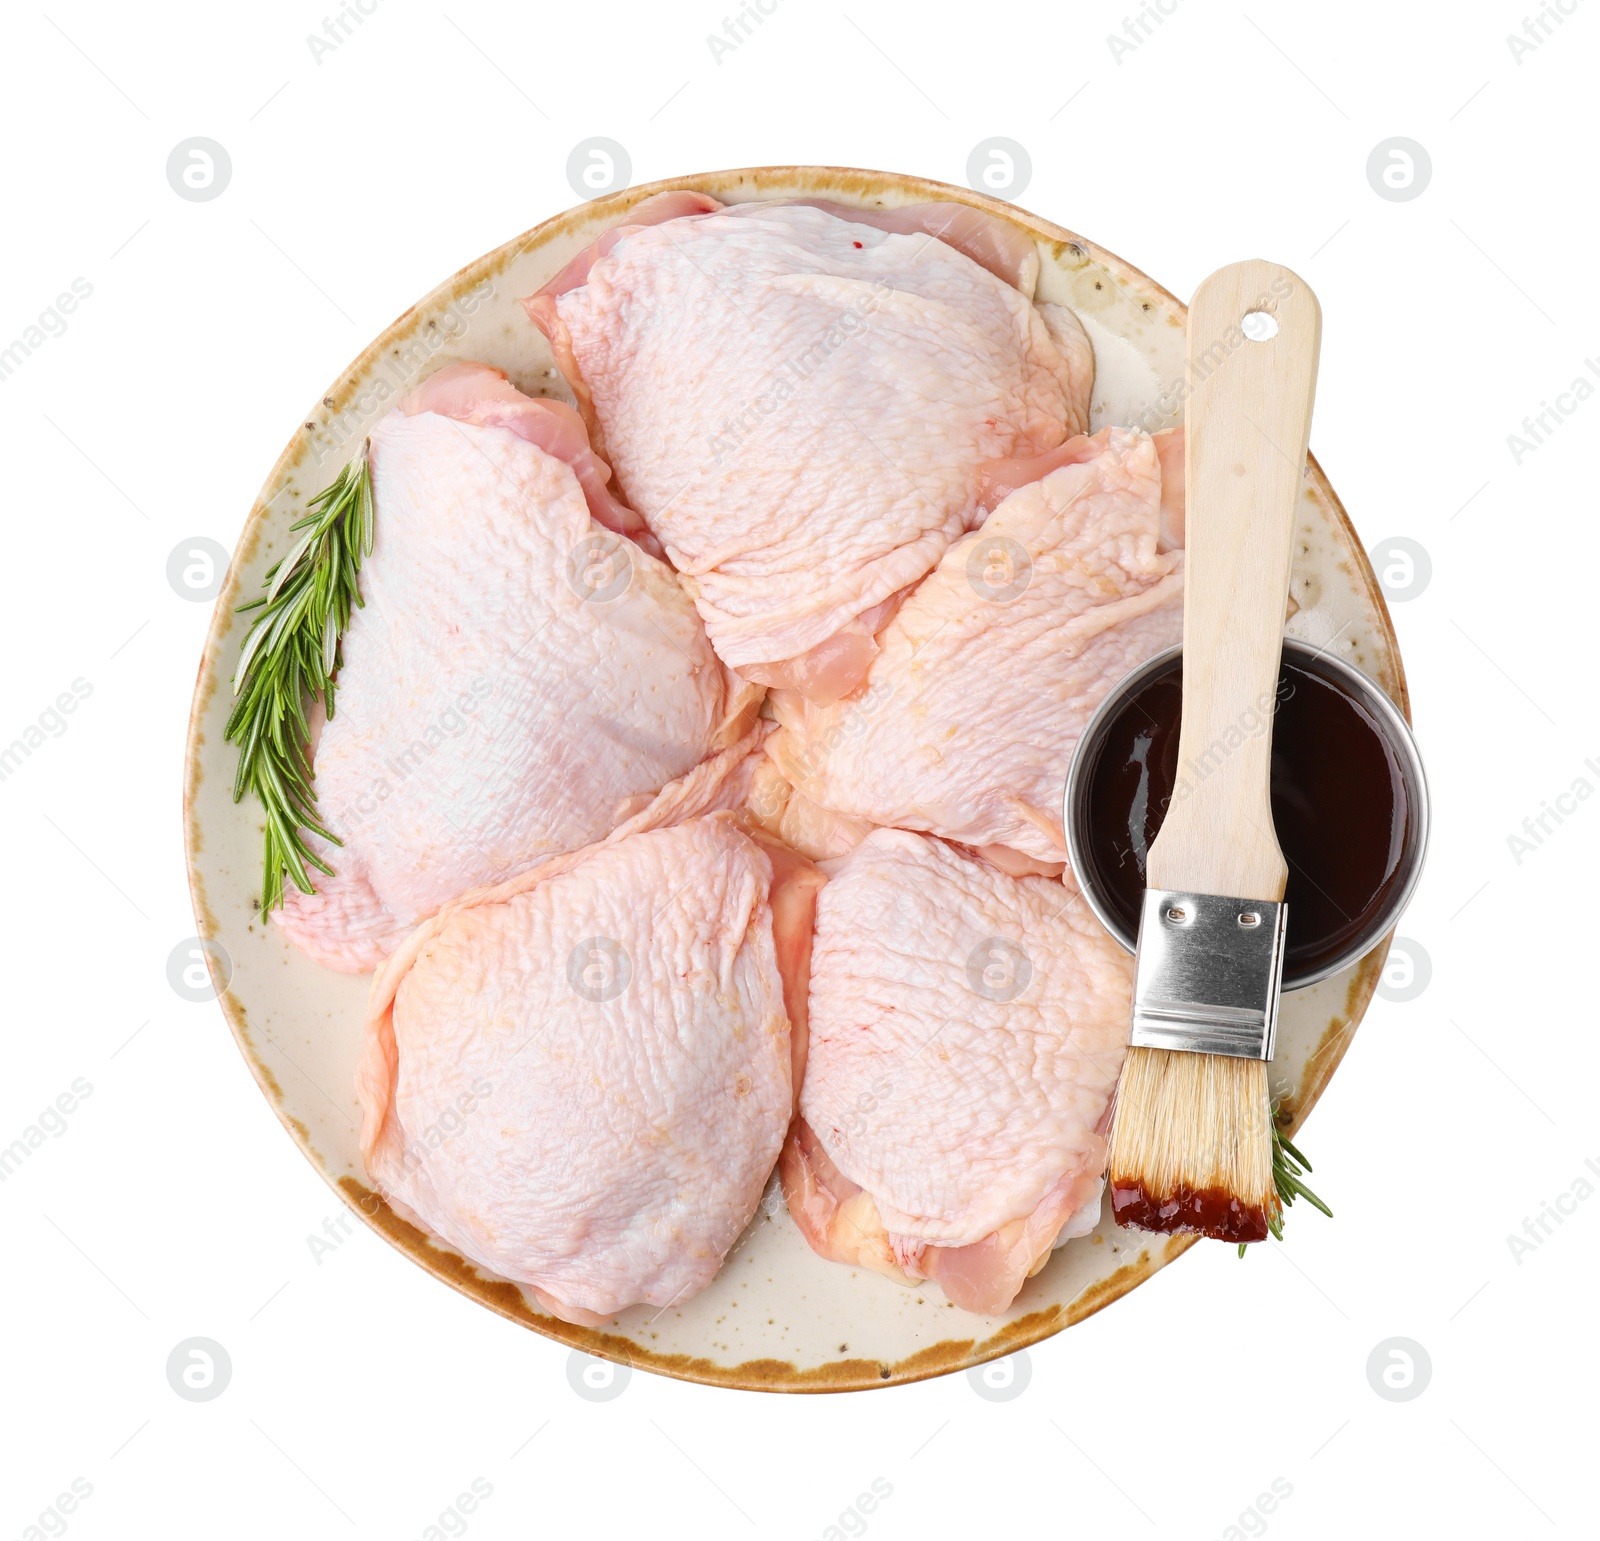 Photo of Plate with marinade, basting brush, raw chicken and rosemary isolated on white, top view